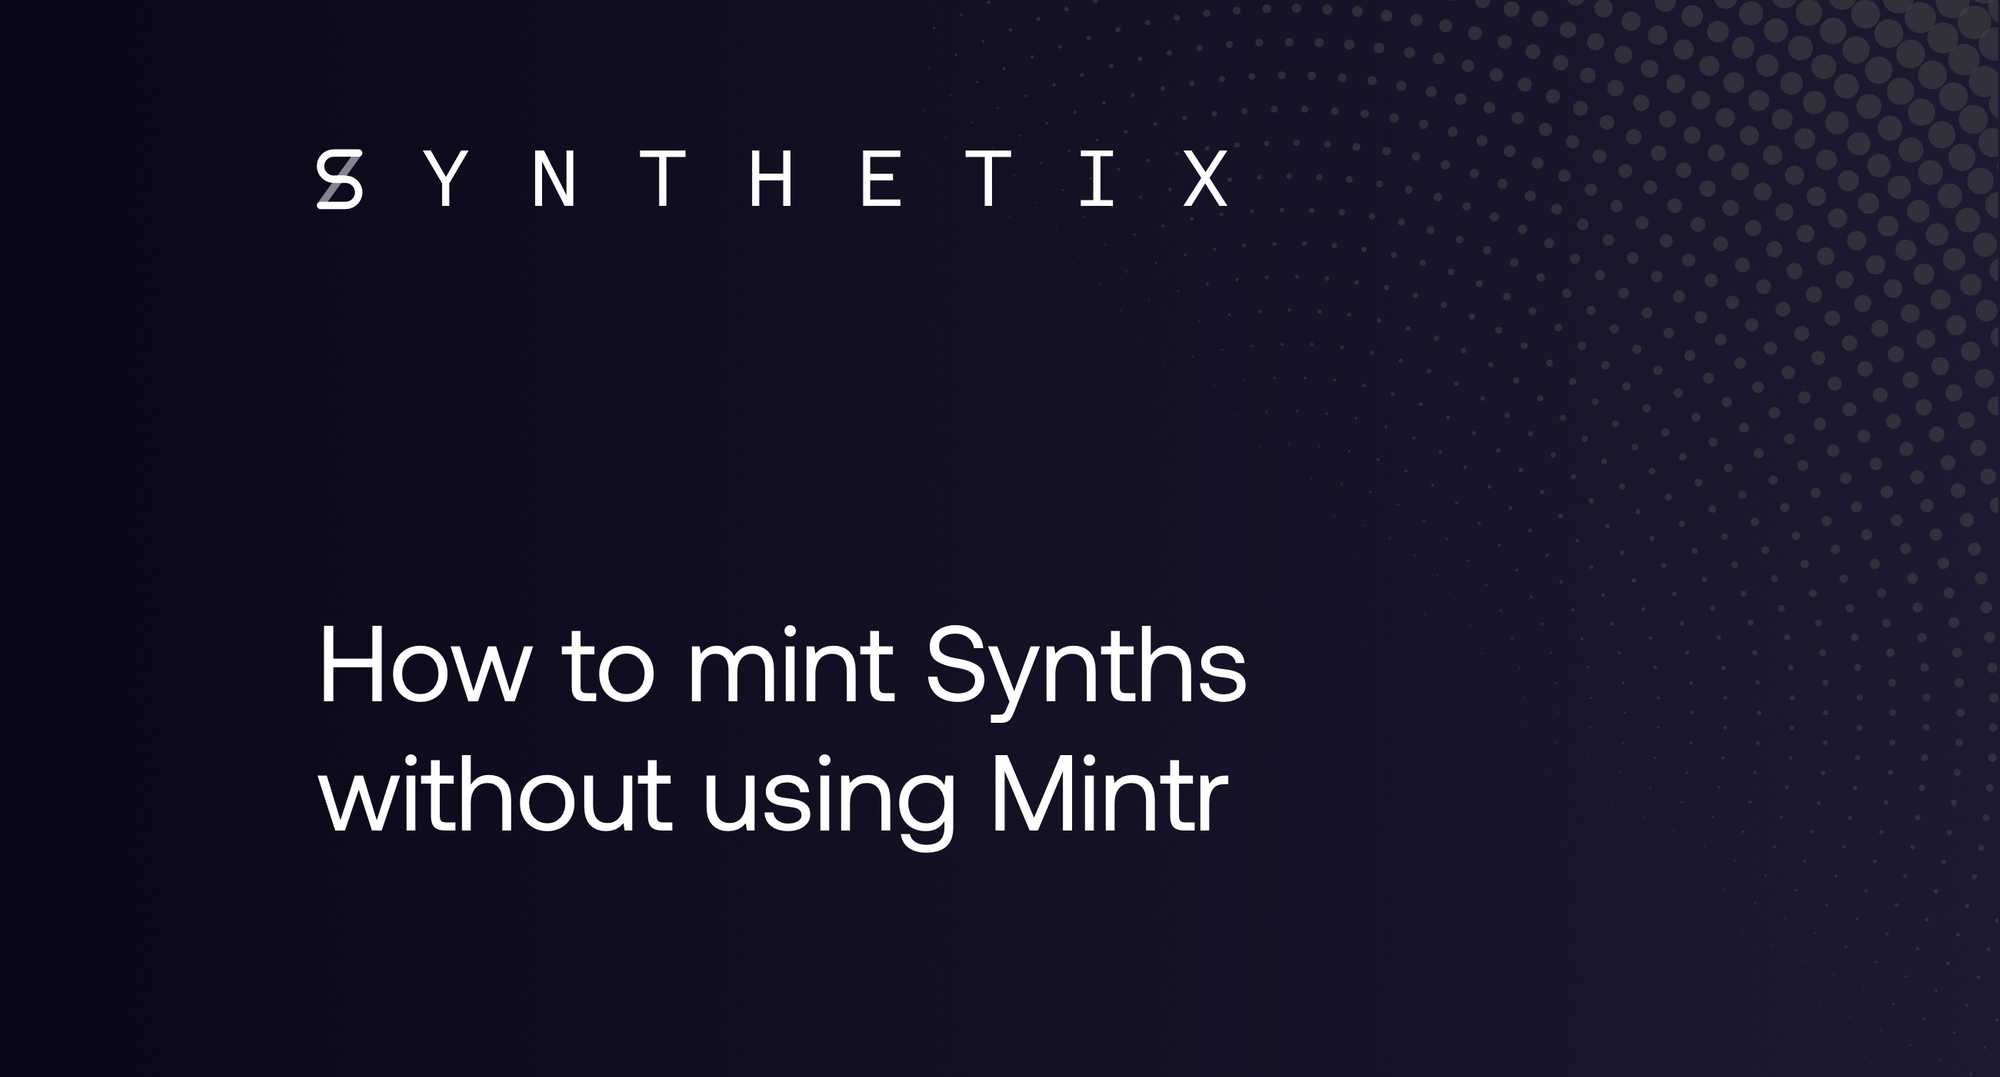 How to mint Synths without using Mintr